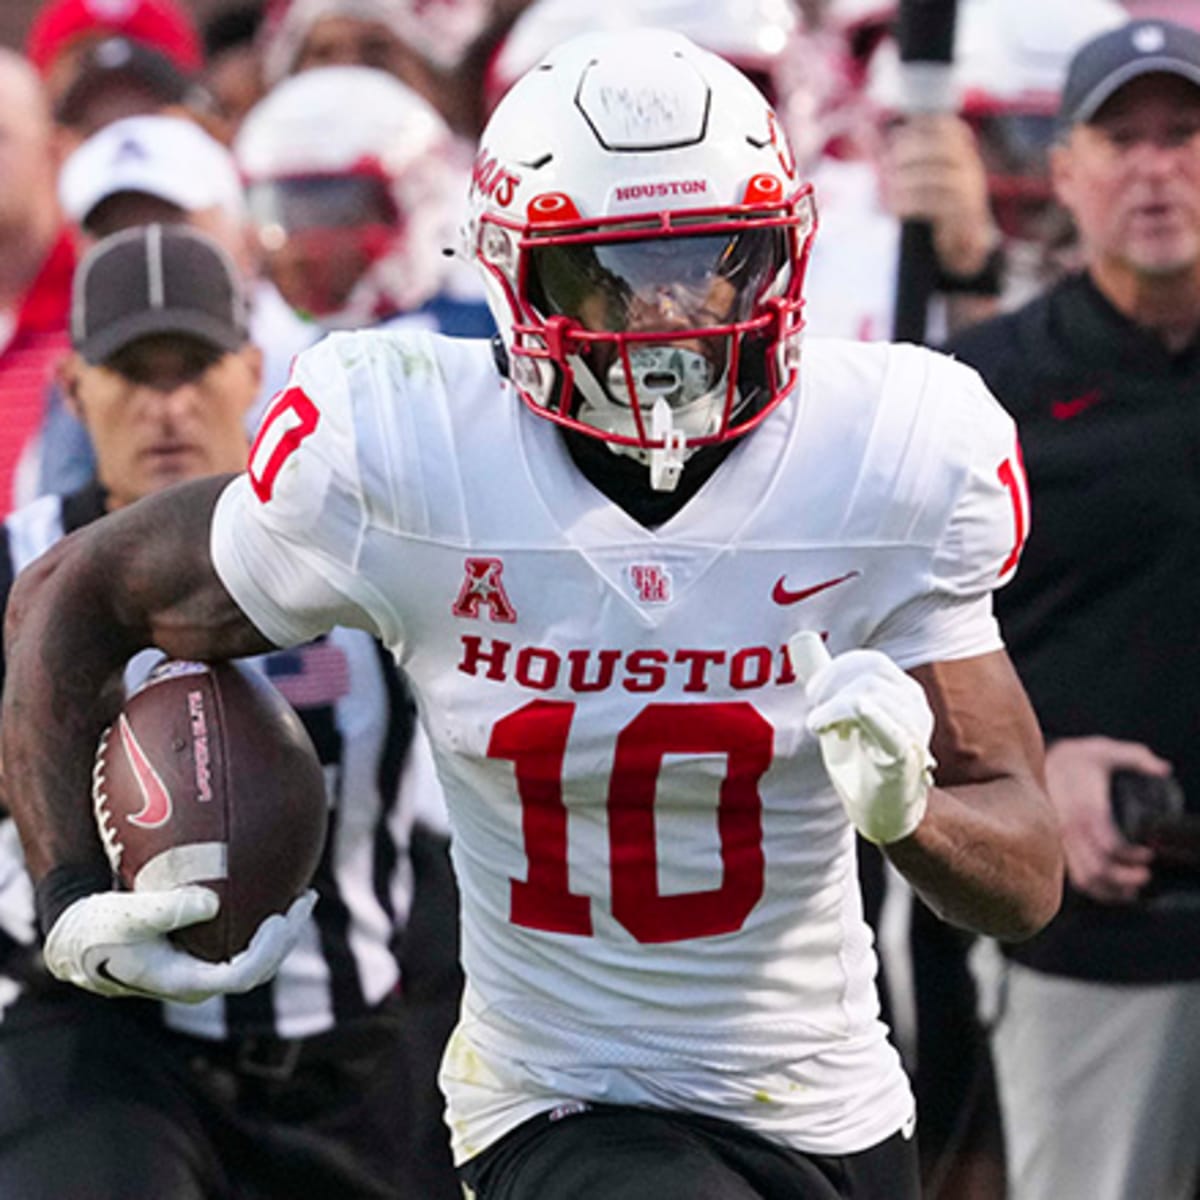 Houston Football: Will the Cougars be back in 2021? - Page 2